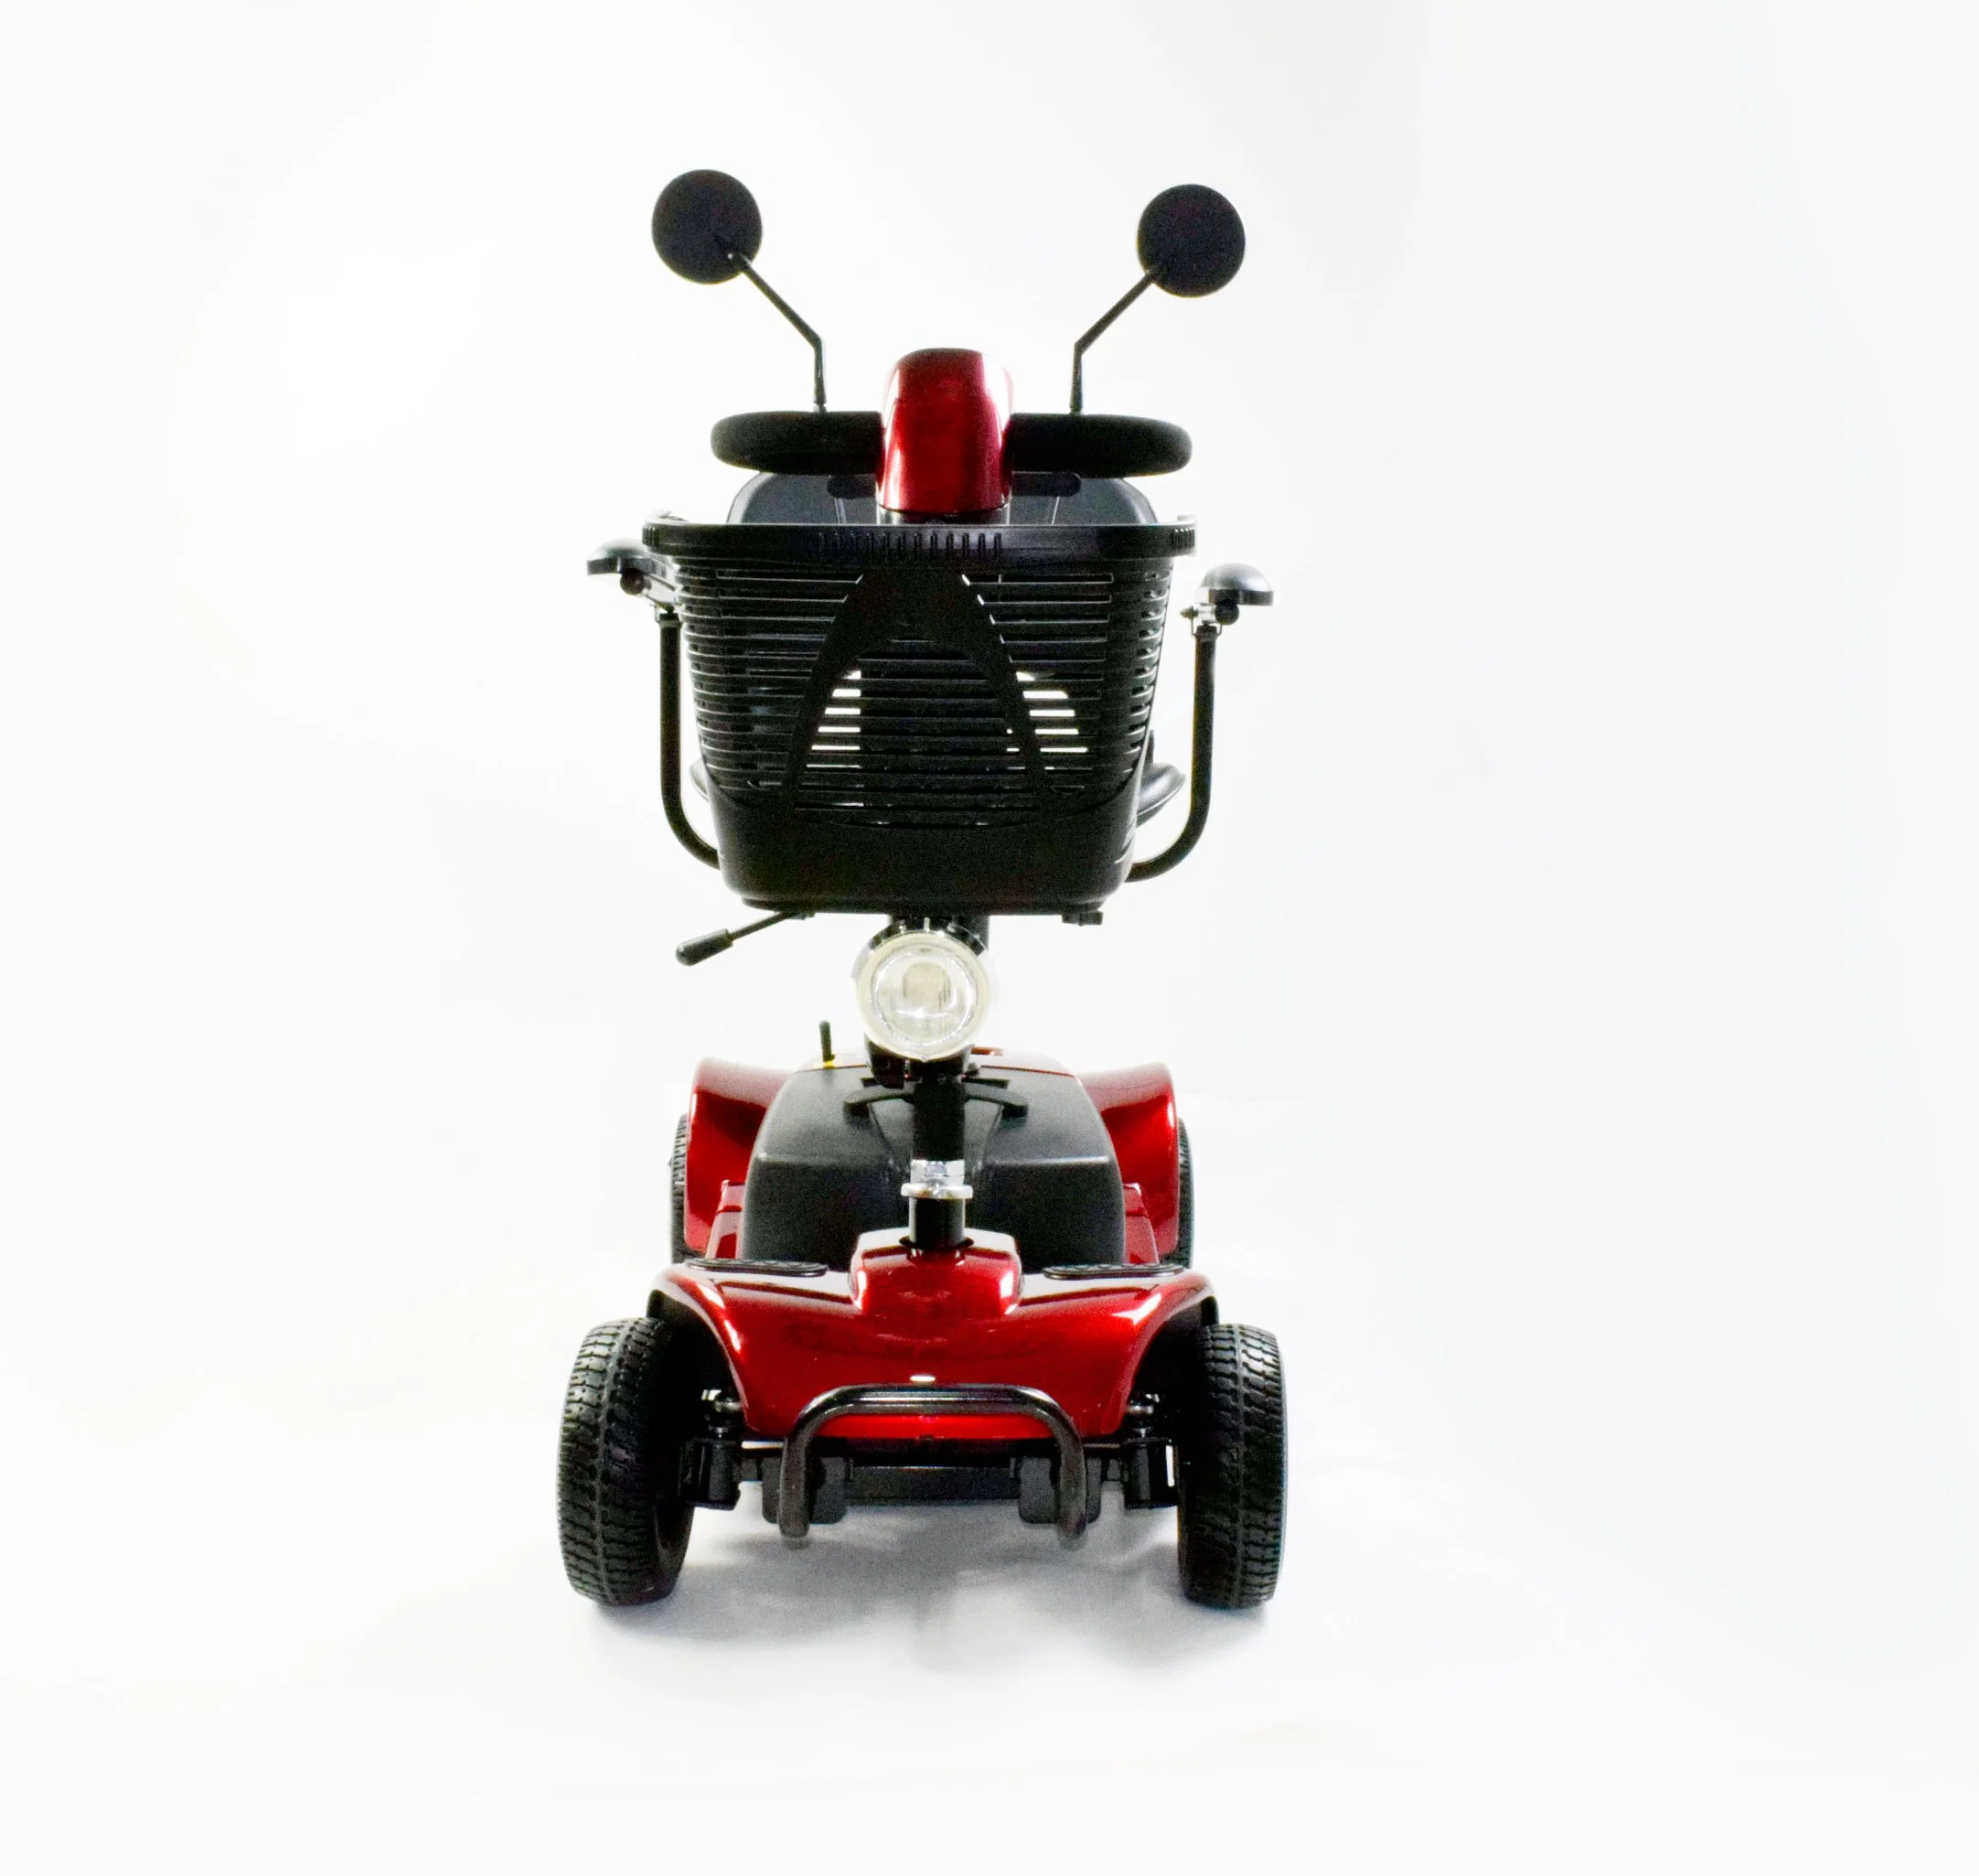 CE Approved Electric Mobility Scooter with Good Quality